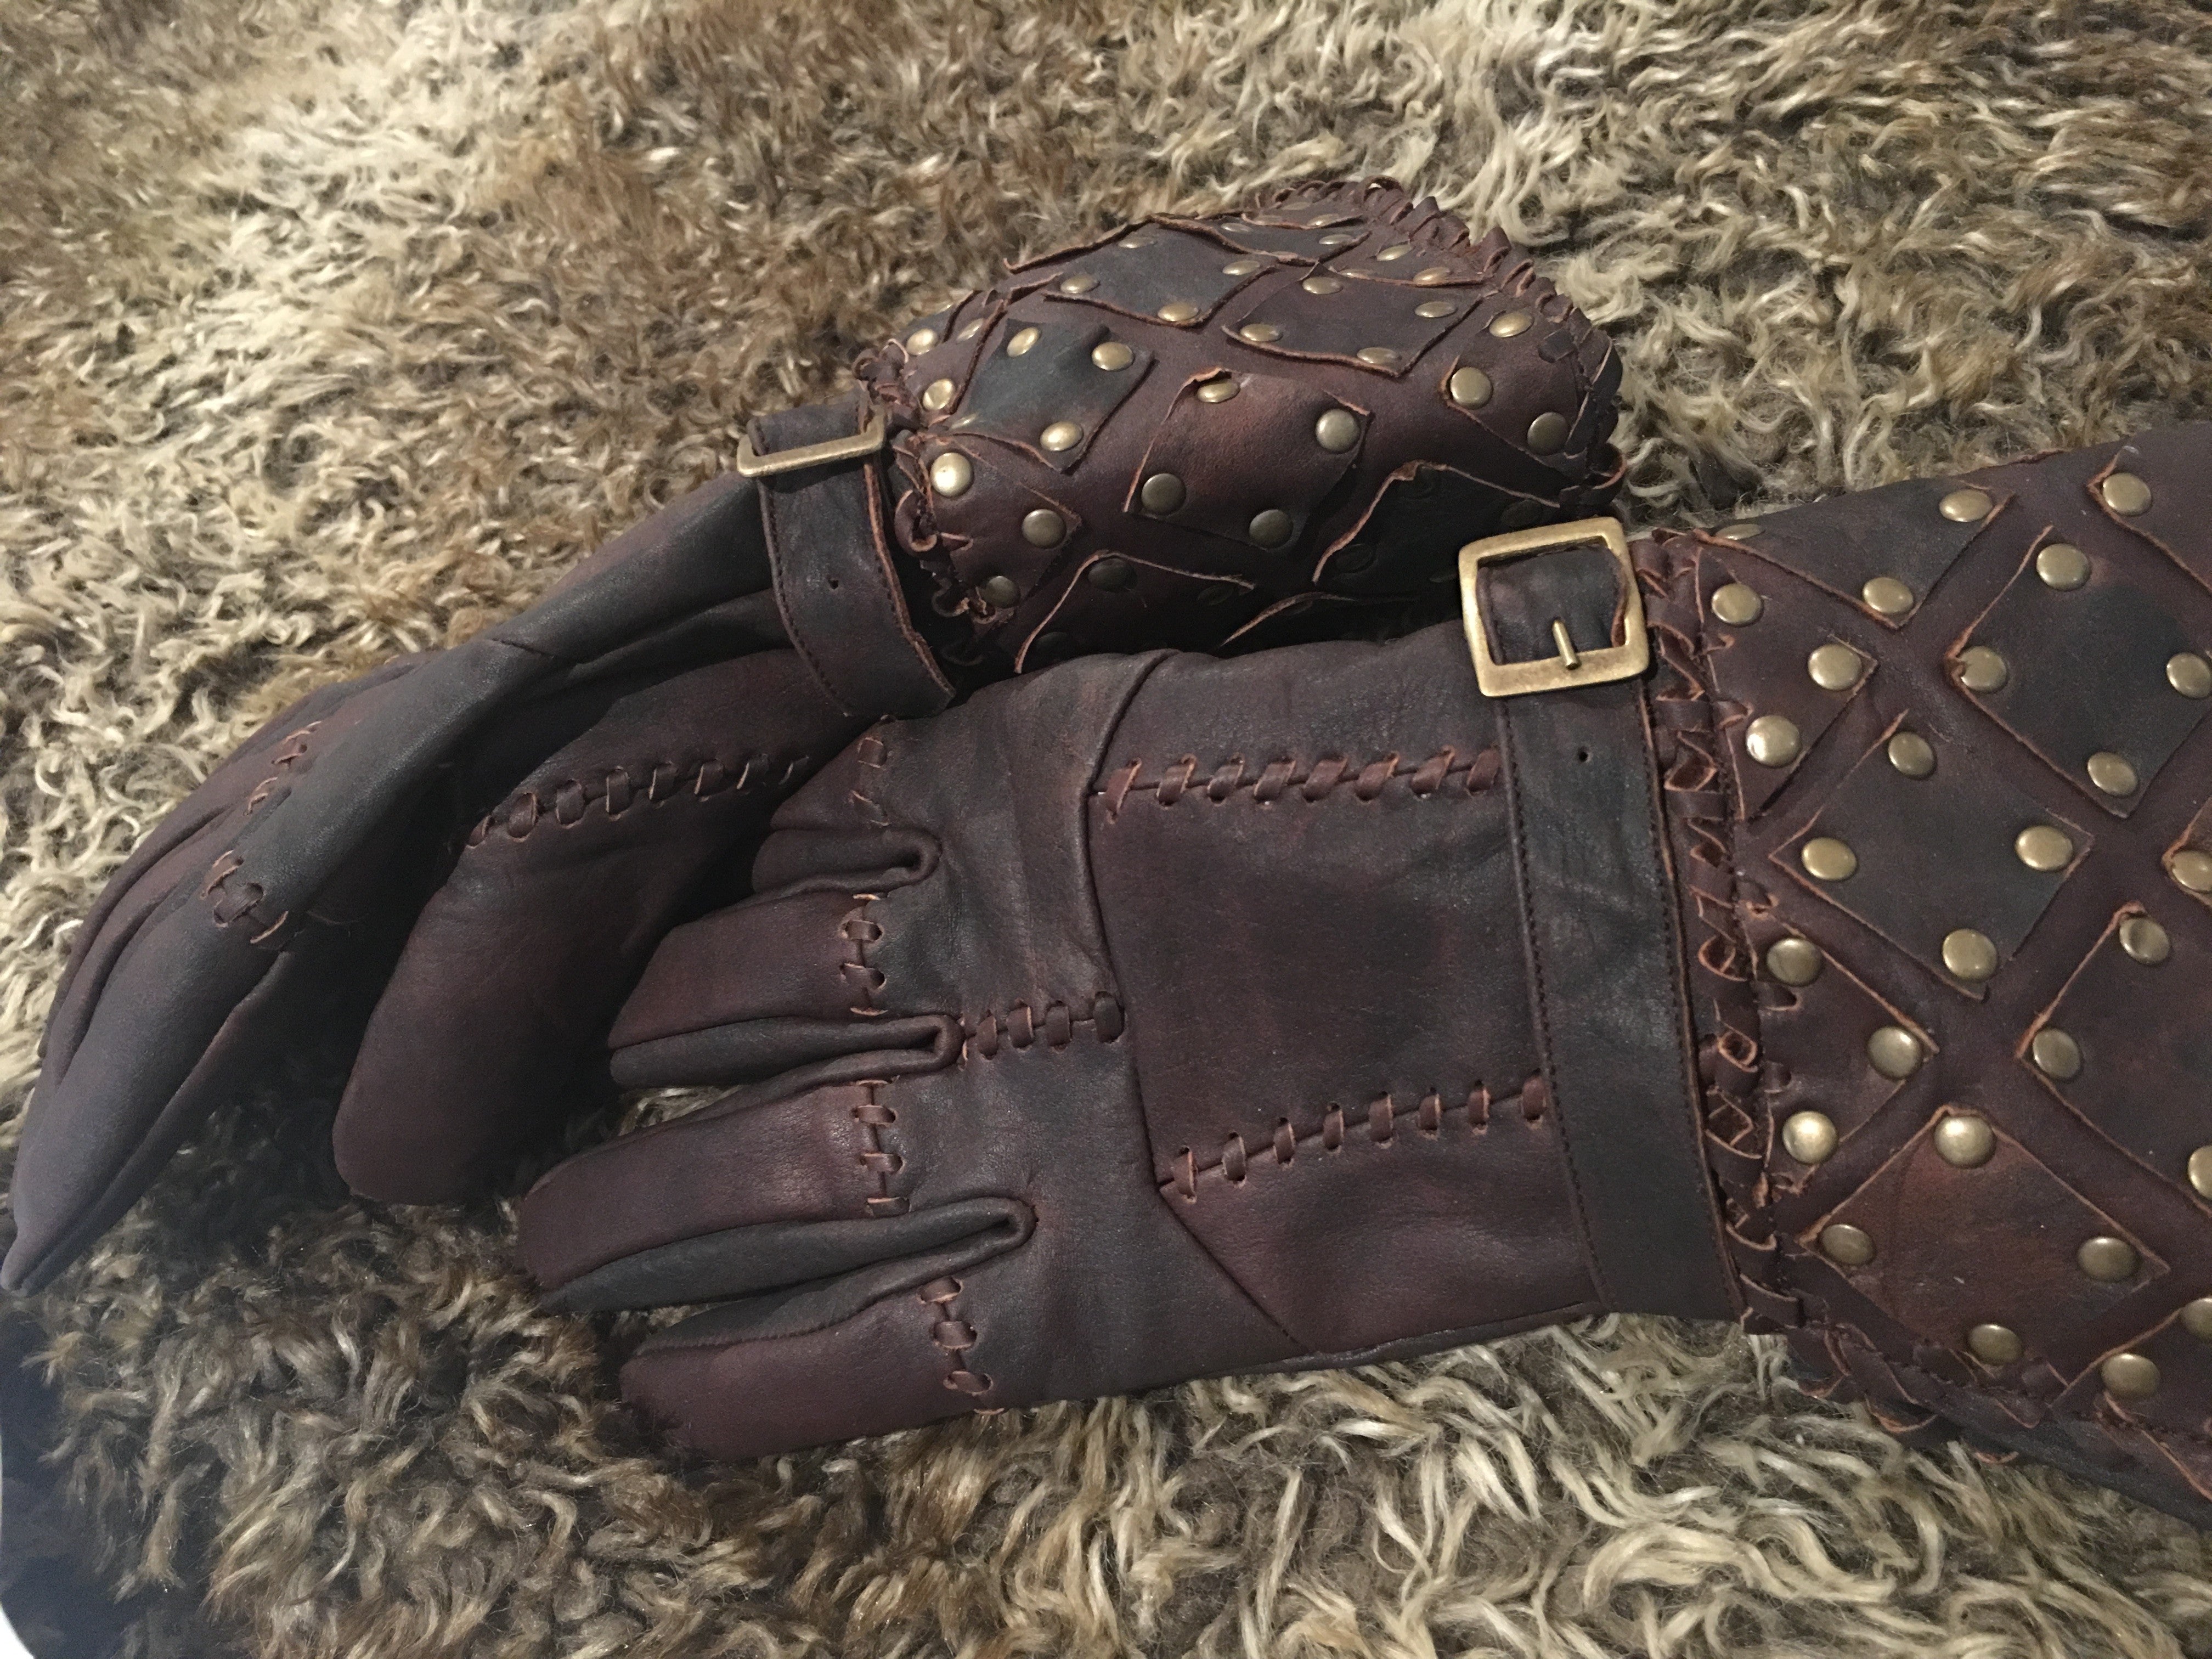 ODIN leather gloves with HIPORA membrane